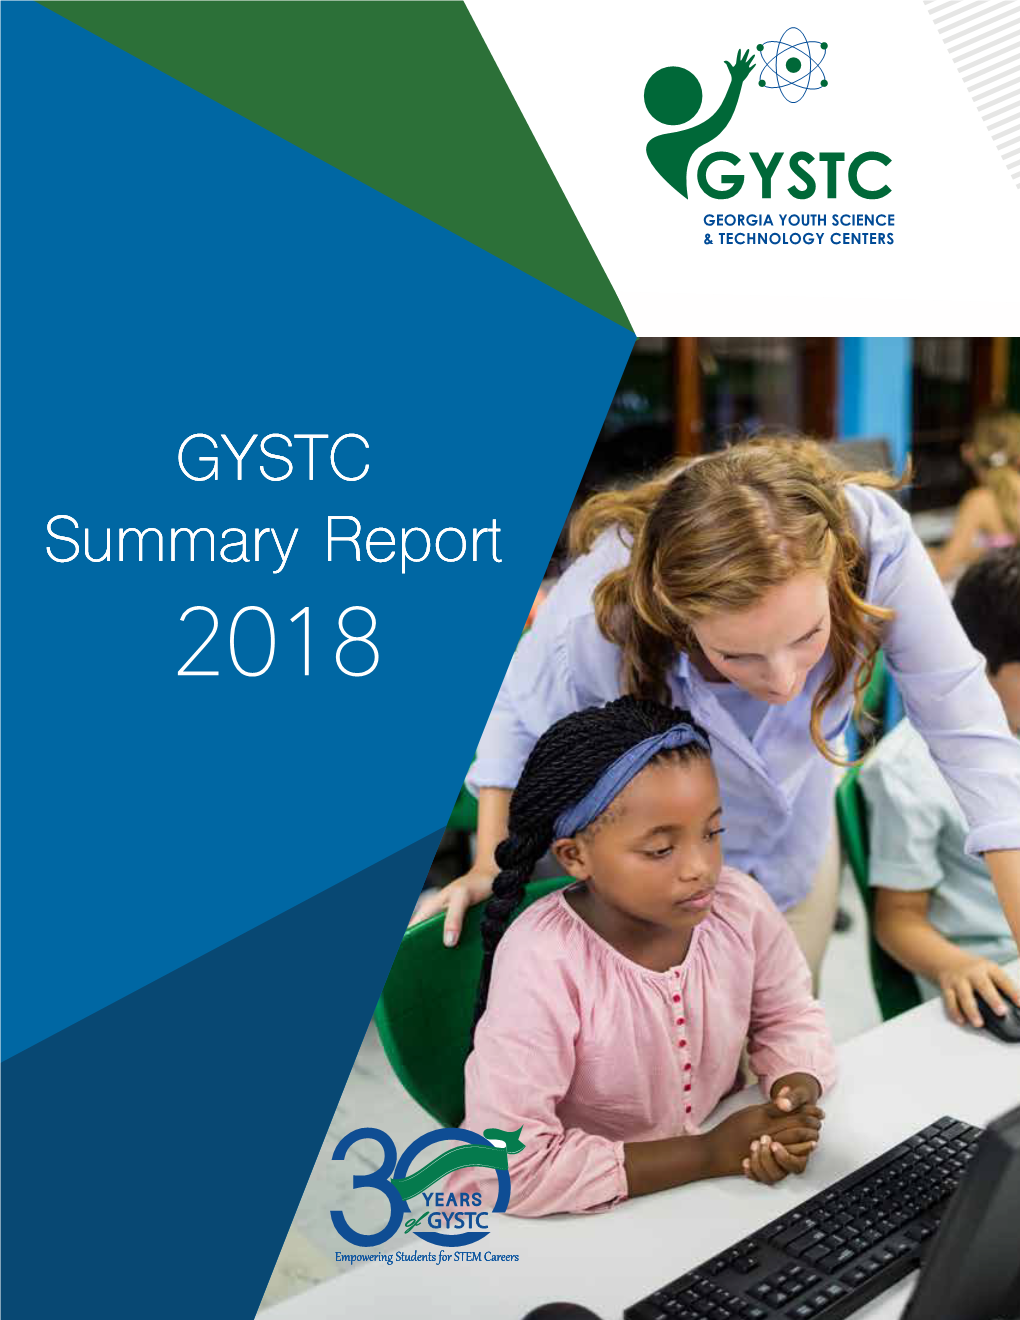 GYSTC Summary Report 2018 Table of Contents